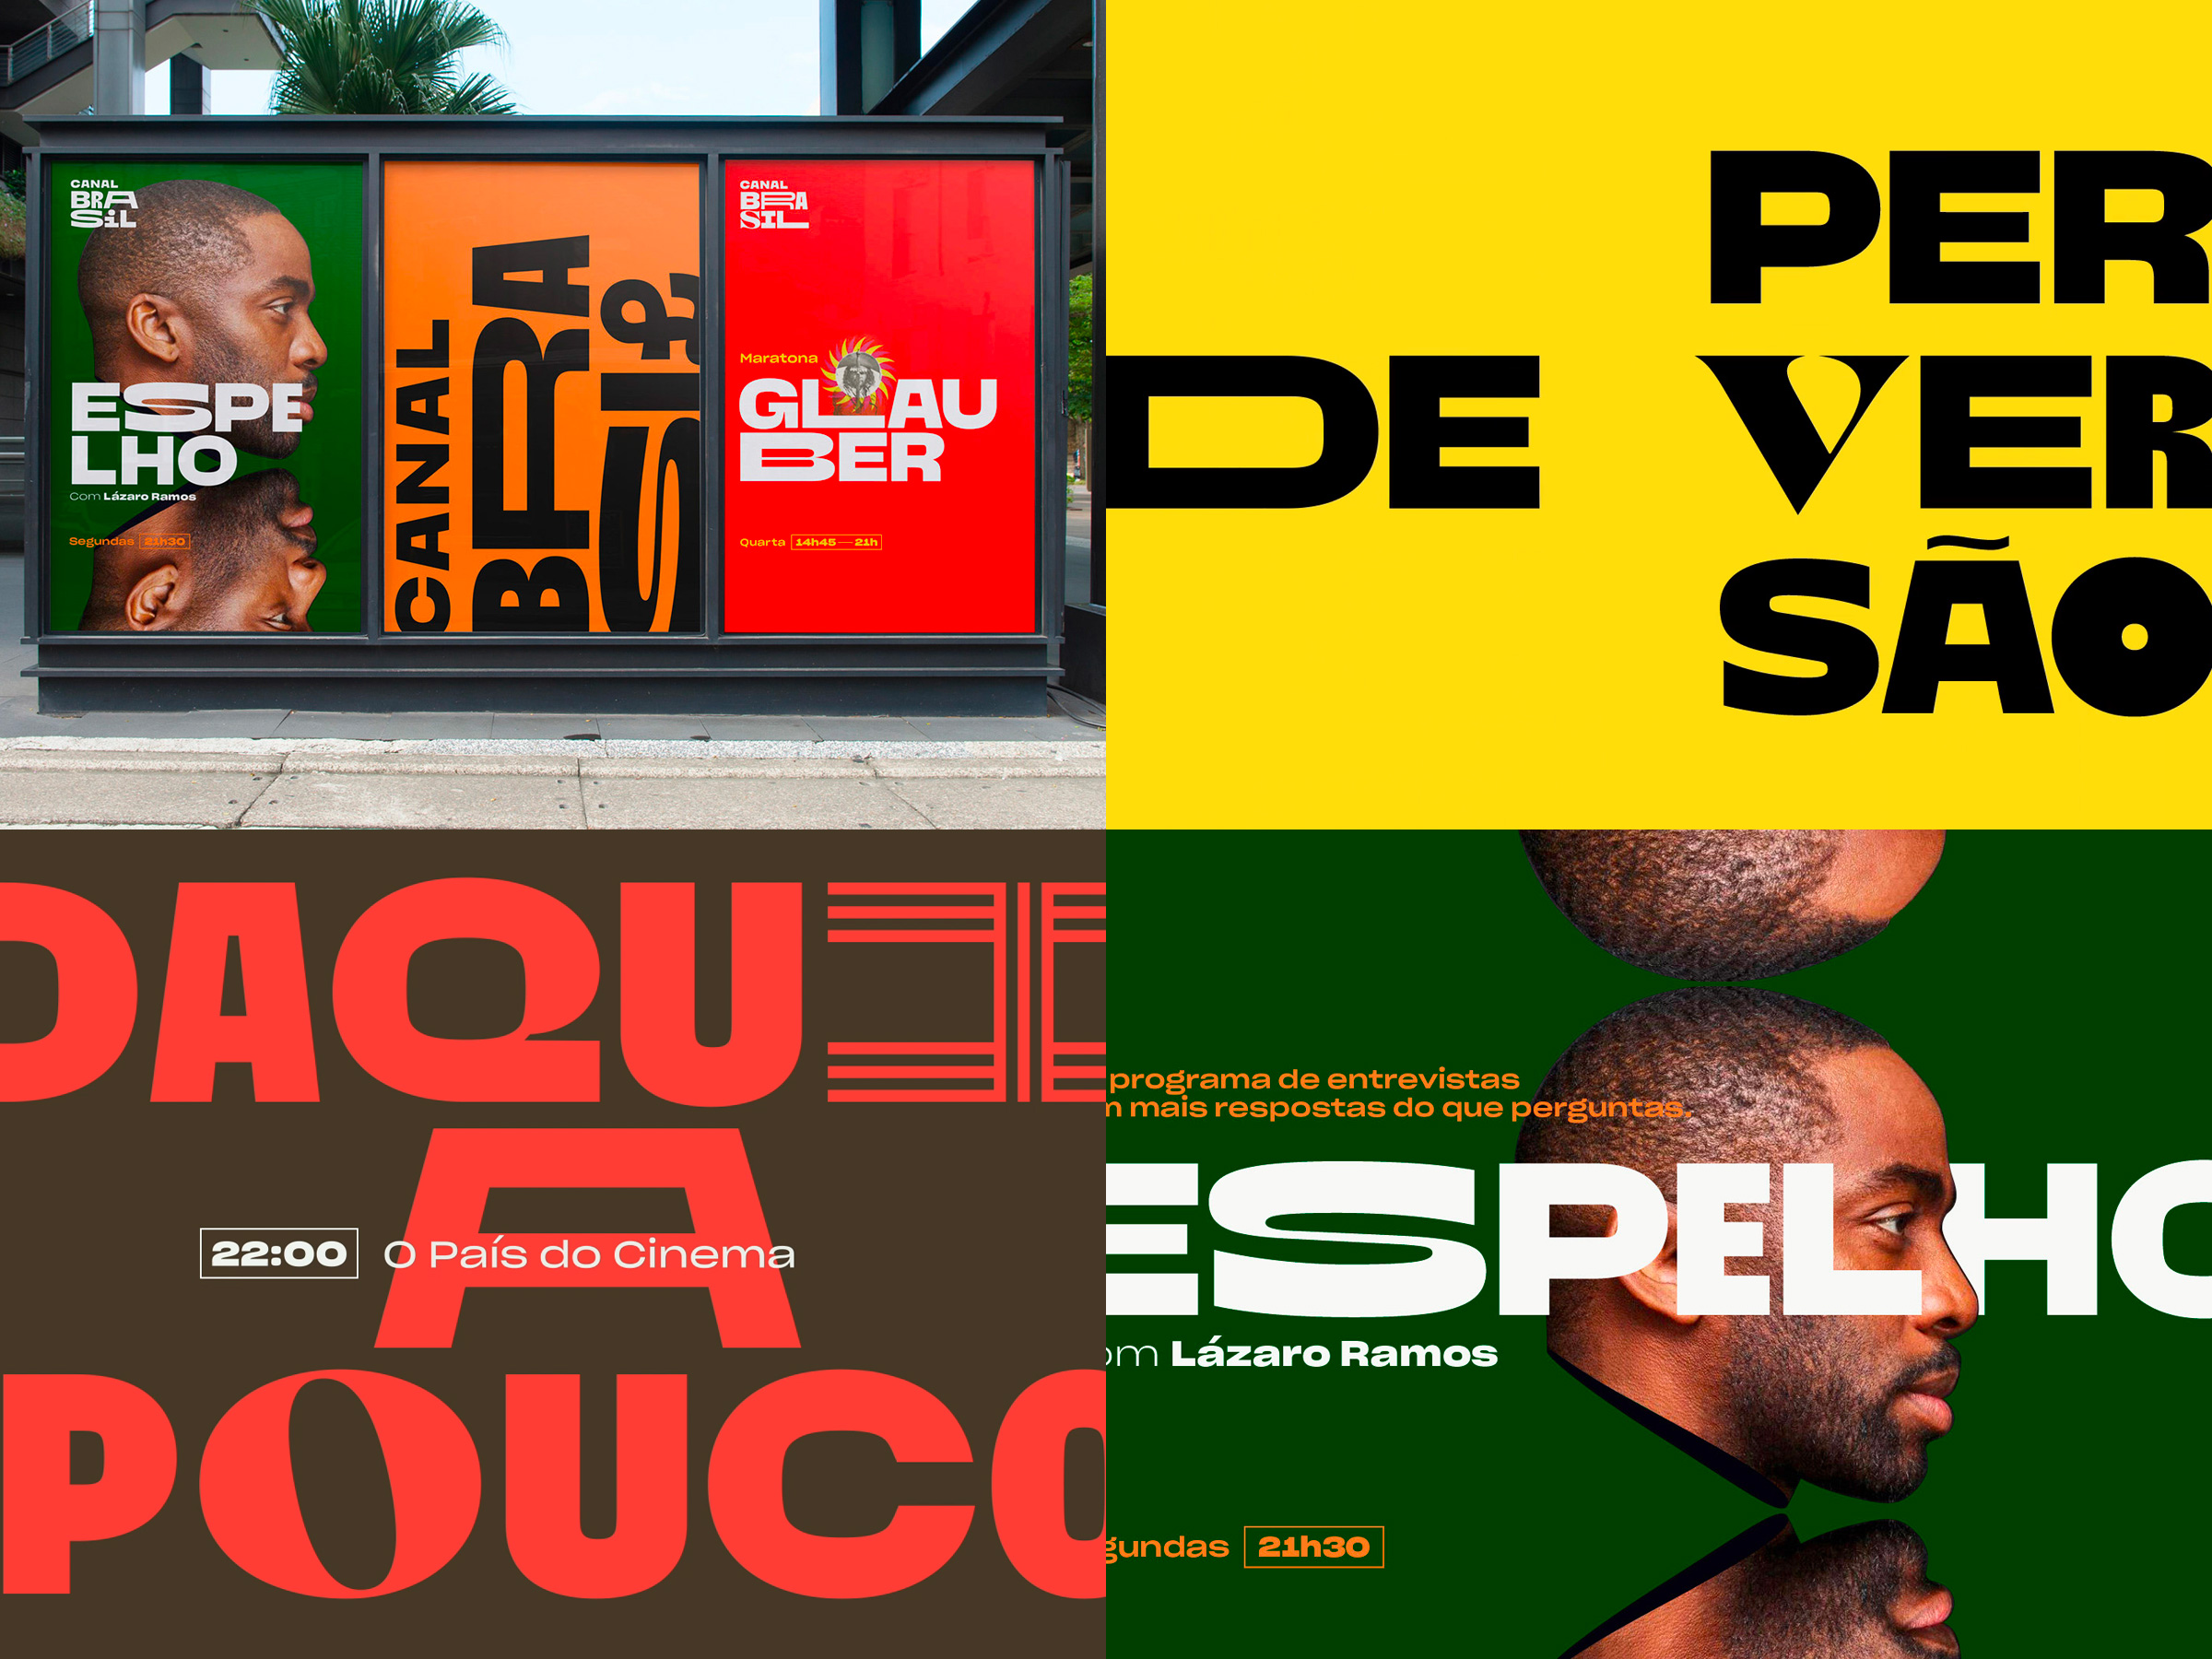 Proprietary type for Canal Brasil by Tátil Design